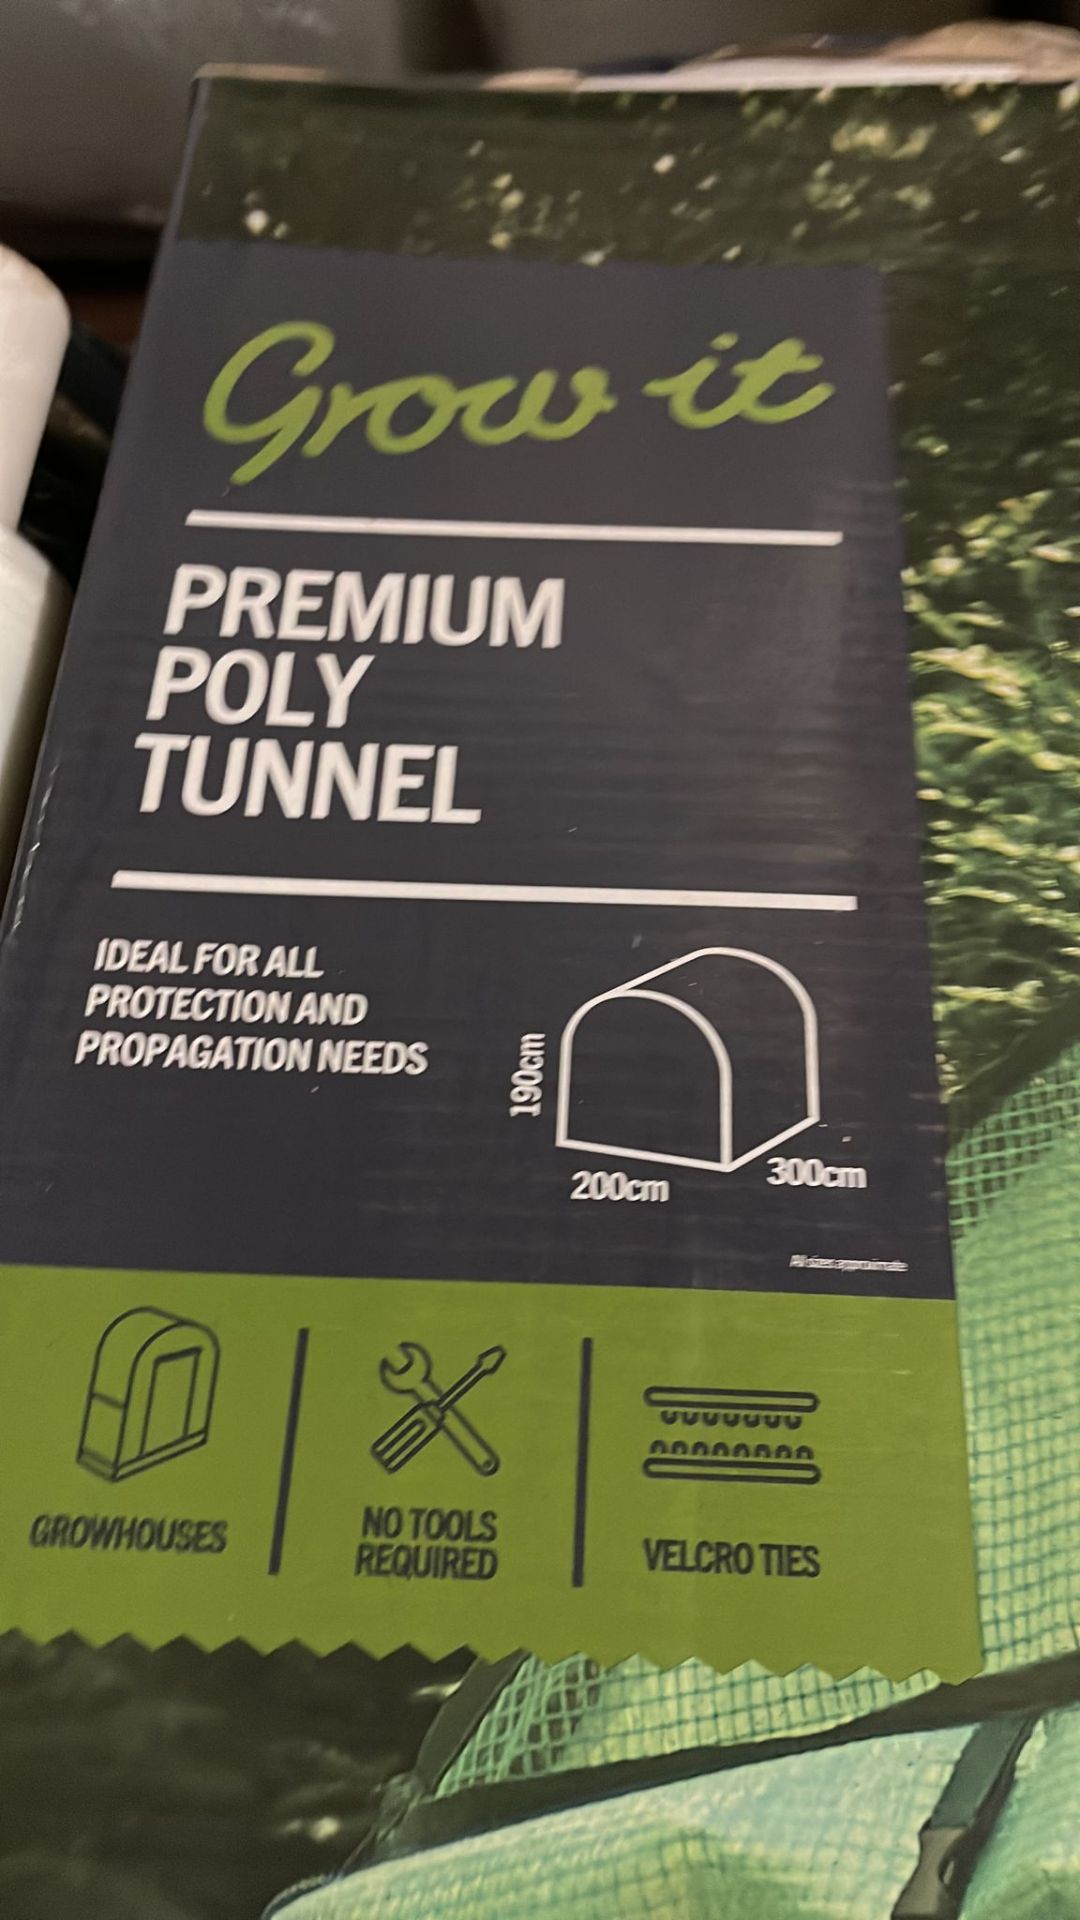 1 PALLET OF 9 BRAND NEW GROW IT PREMIUM POLY TUNNEL